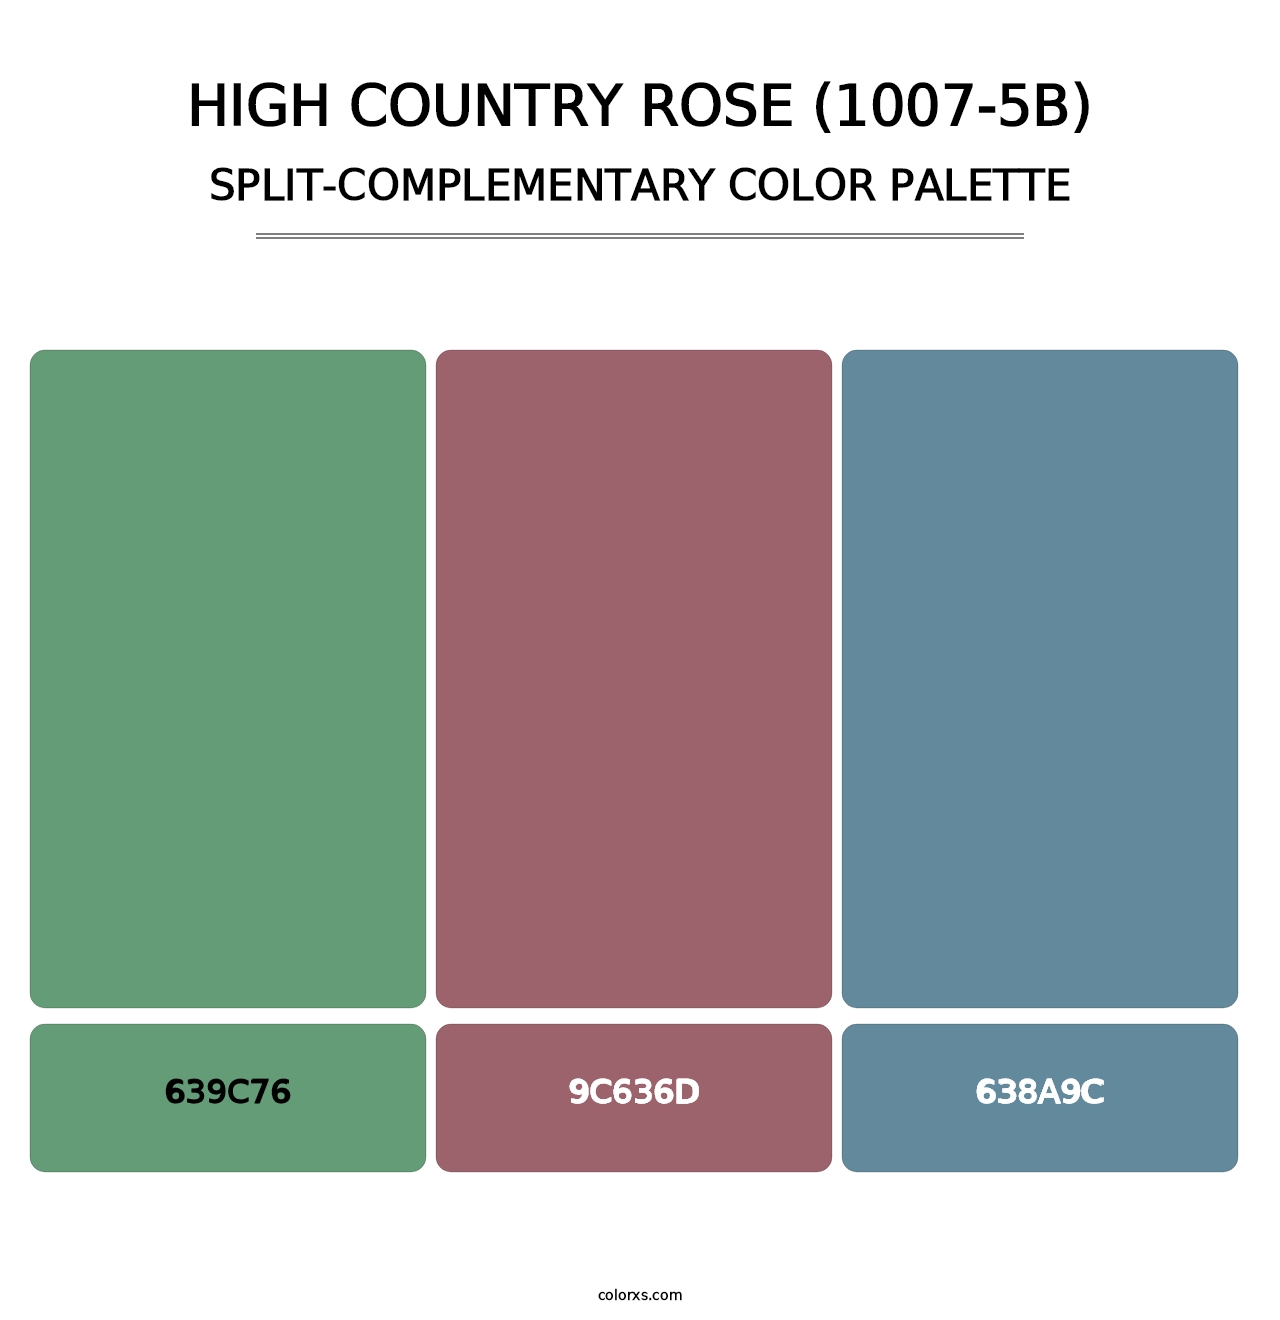 High Country Rose (1007-5B) - Split-Complementary Color Palette